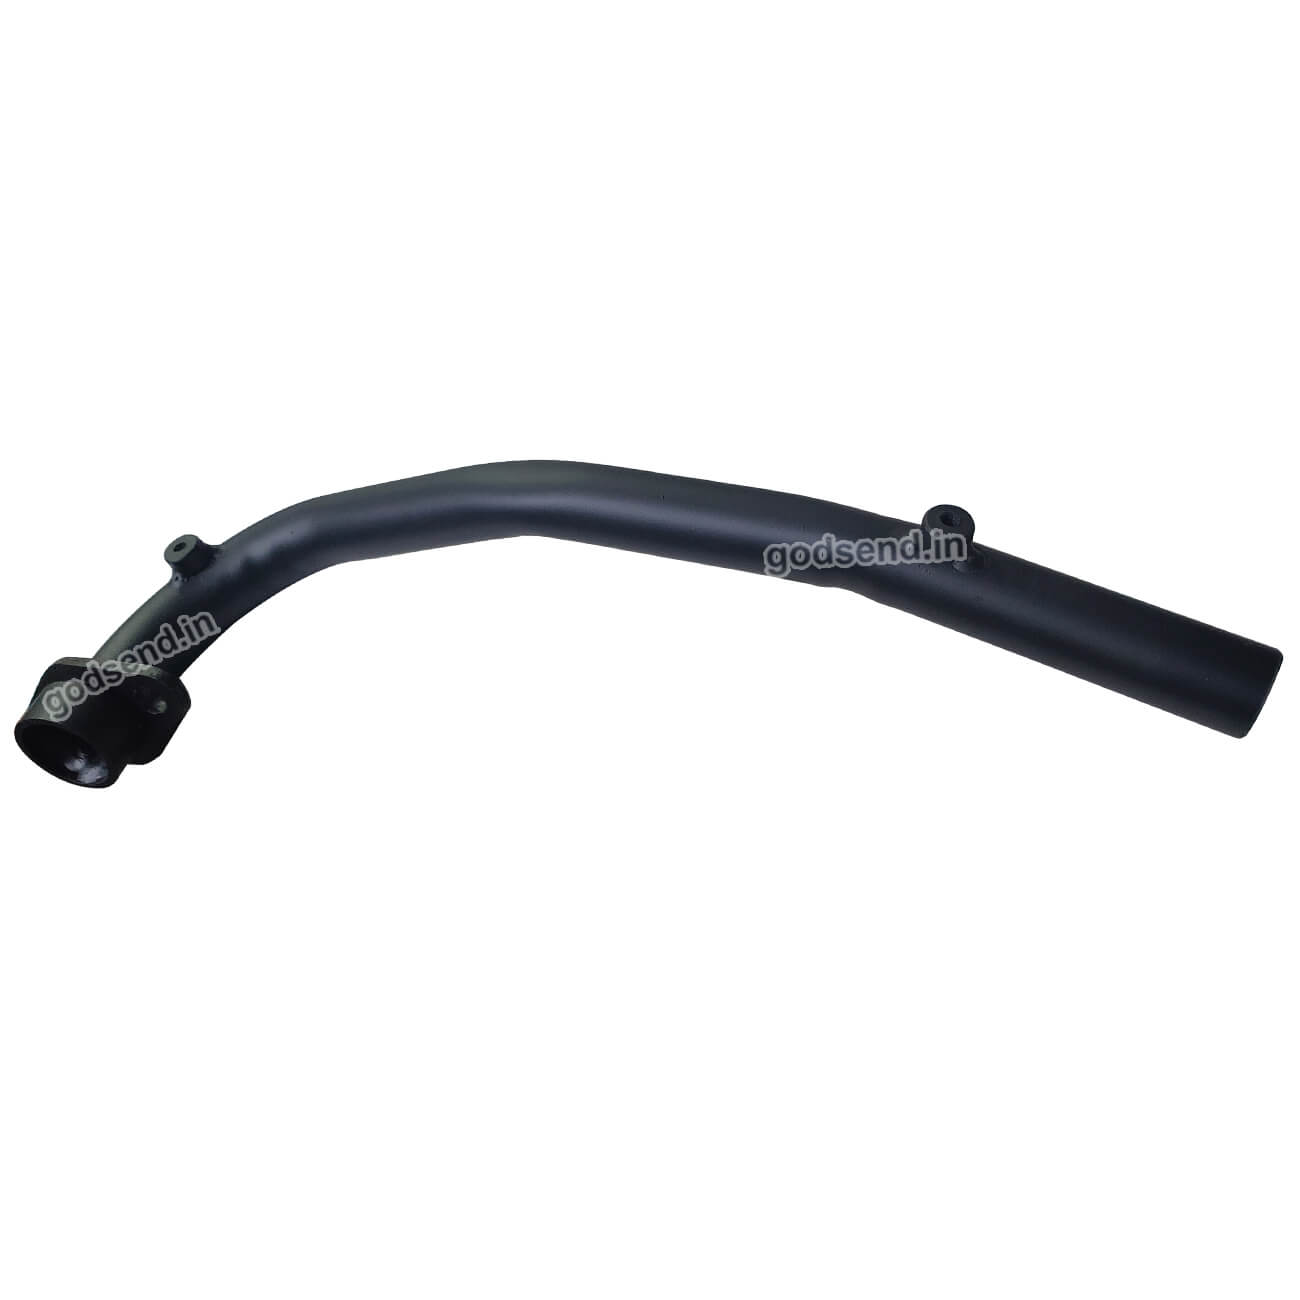 Godsend Glamour Silencer bend Pipe Price Glamour Bike bend Pipe Buy online 3